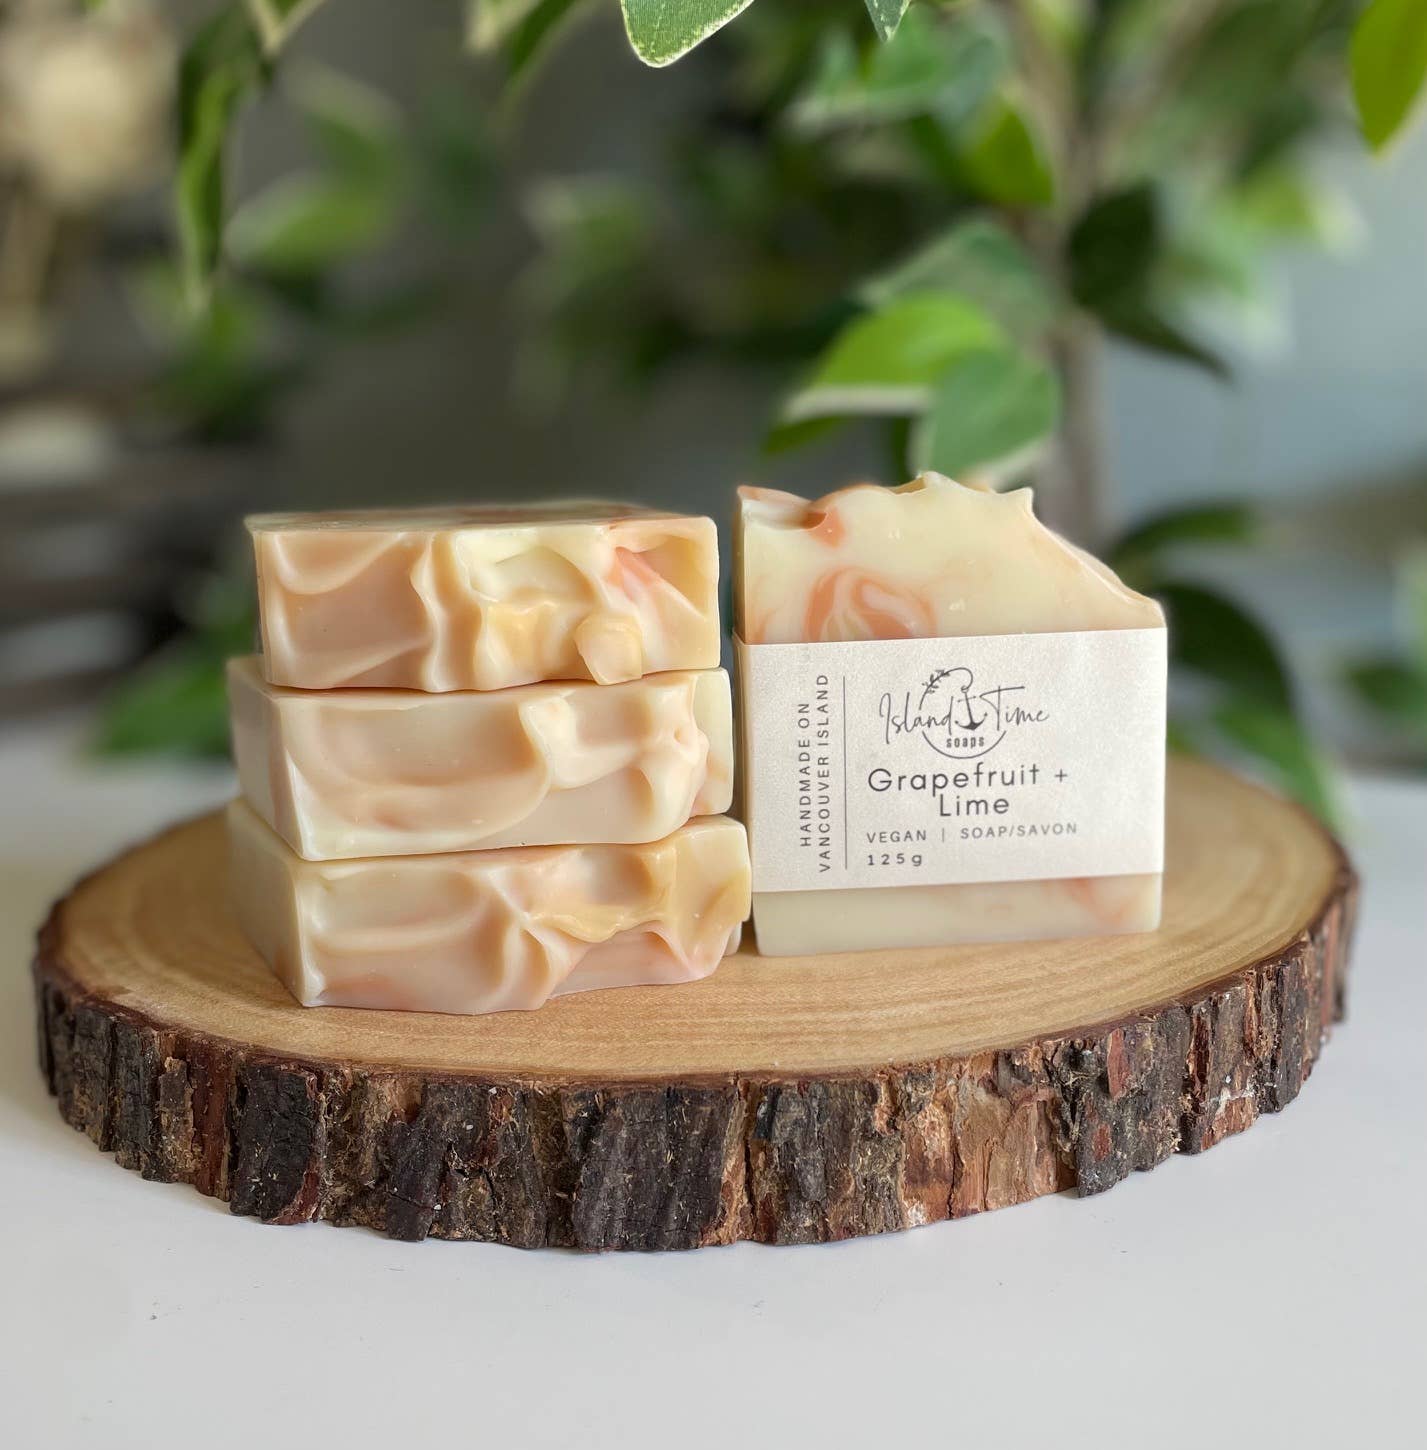 Island Time Soap + Candle - All Natural Grapefruit + Lime Handmade Artisan Soap